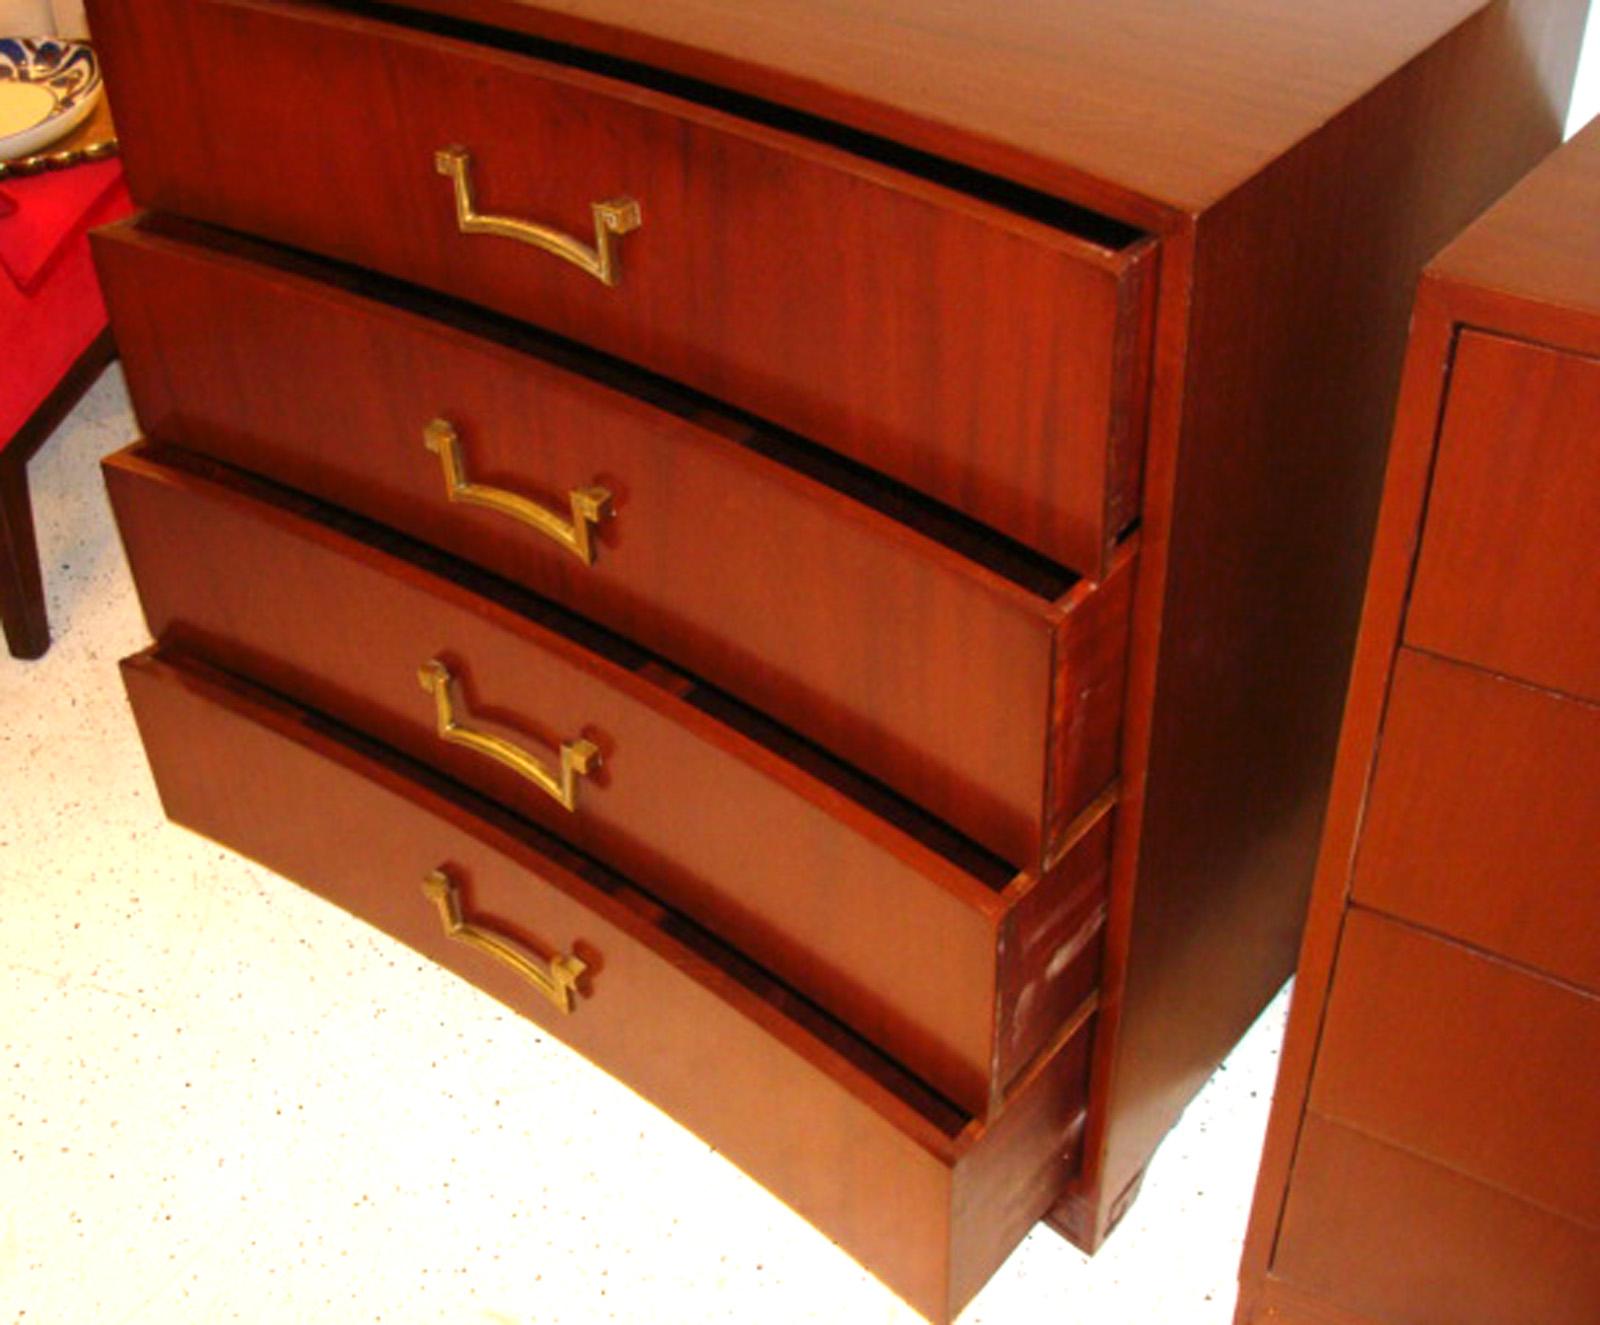 Wonderful pair of modernist chests or dressers from Grosfeld House. Designed by Lorin Jackson and reflective of
the Art Moderne/Modernist movement in America during the 1940s. It can be included within the broader Mid-Century Modern definition.